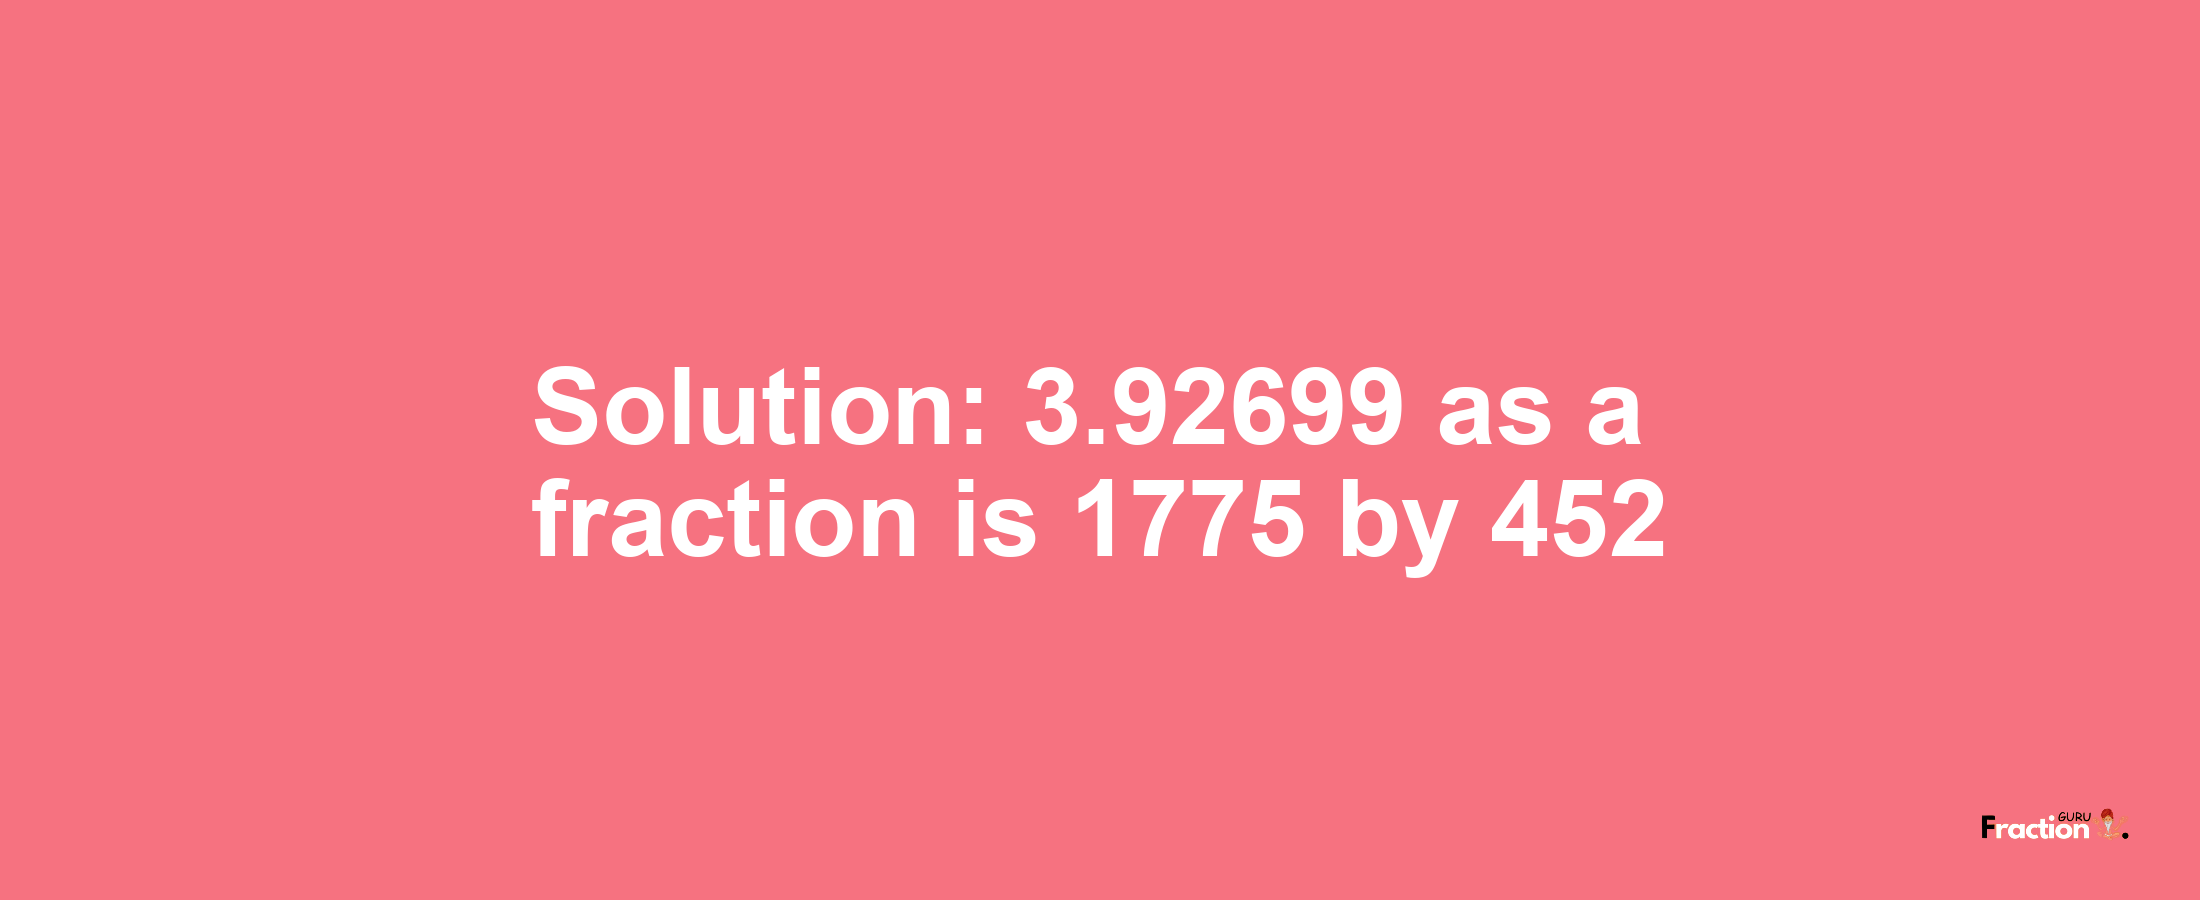 Solution:3.92699 as a fraction is 1775/452